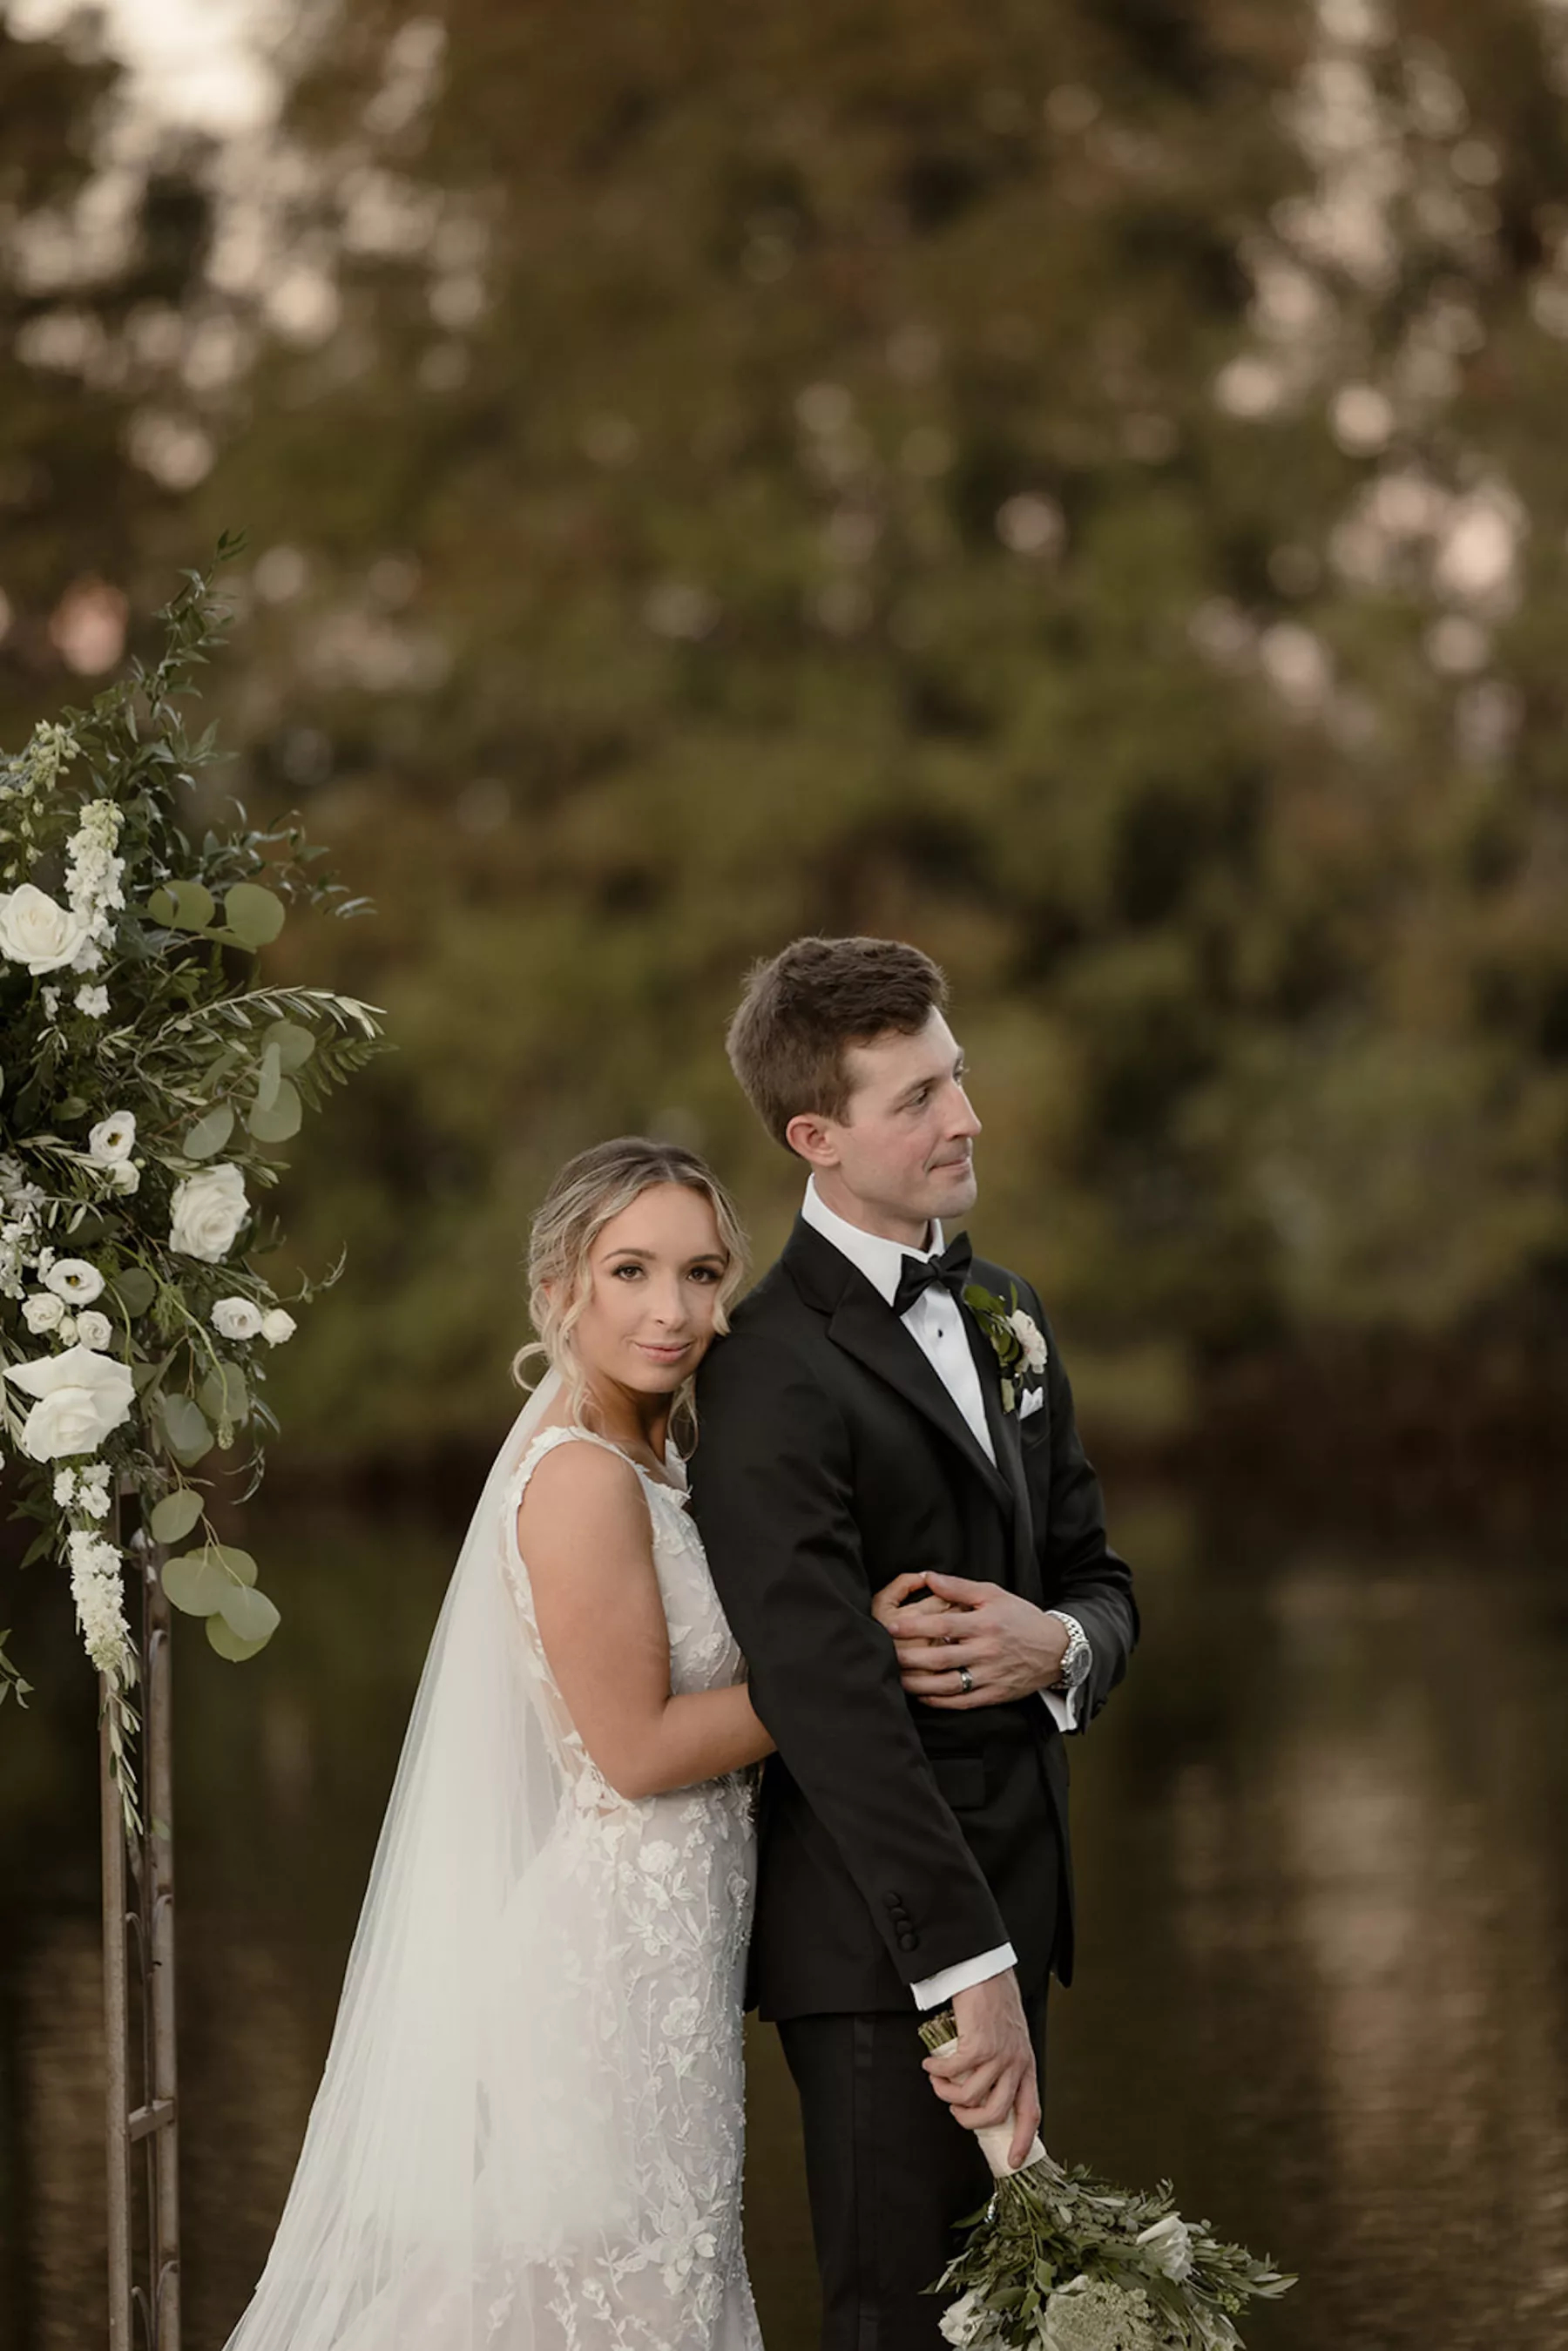 Bride and Groom Just Married Wedding Portrait | Central Florida Photographer and Videographer Evoke Photo and Film